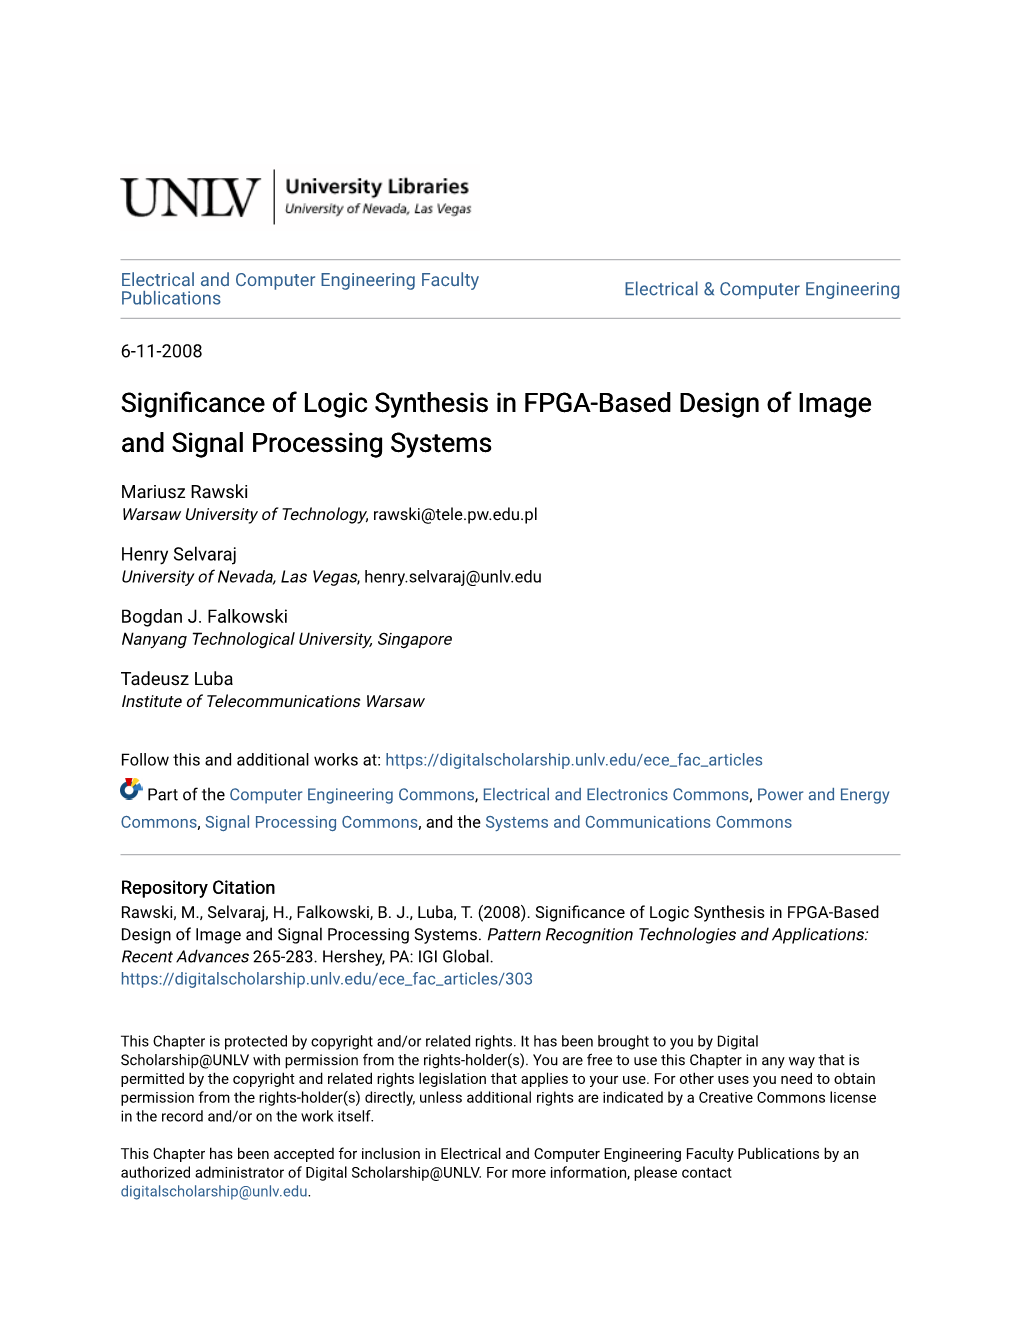 Significance of Logic Synthesis in FPGA-Based Design of Image and Signal Processing Systems